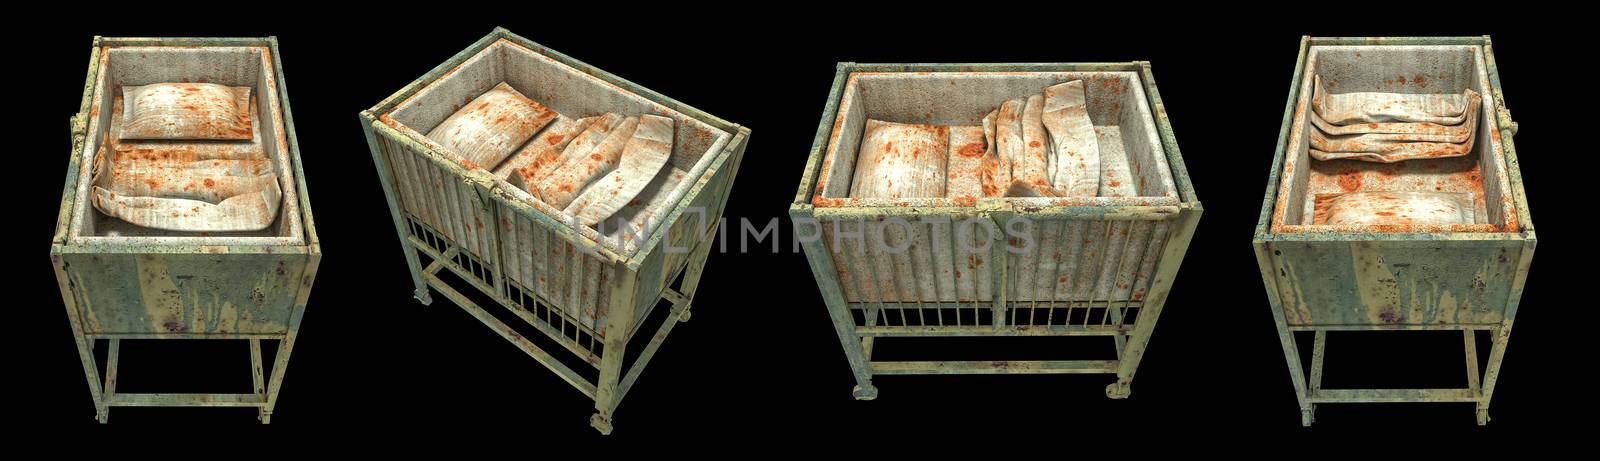 horror creepy and damage Baby cot isolated over black background with clipping path.,3D rendering. by anotestocker